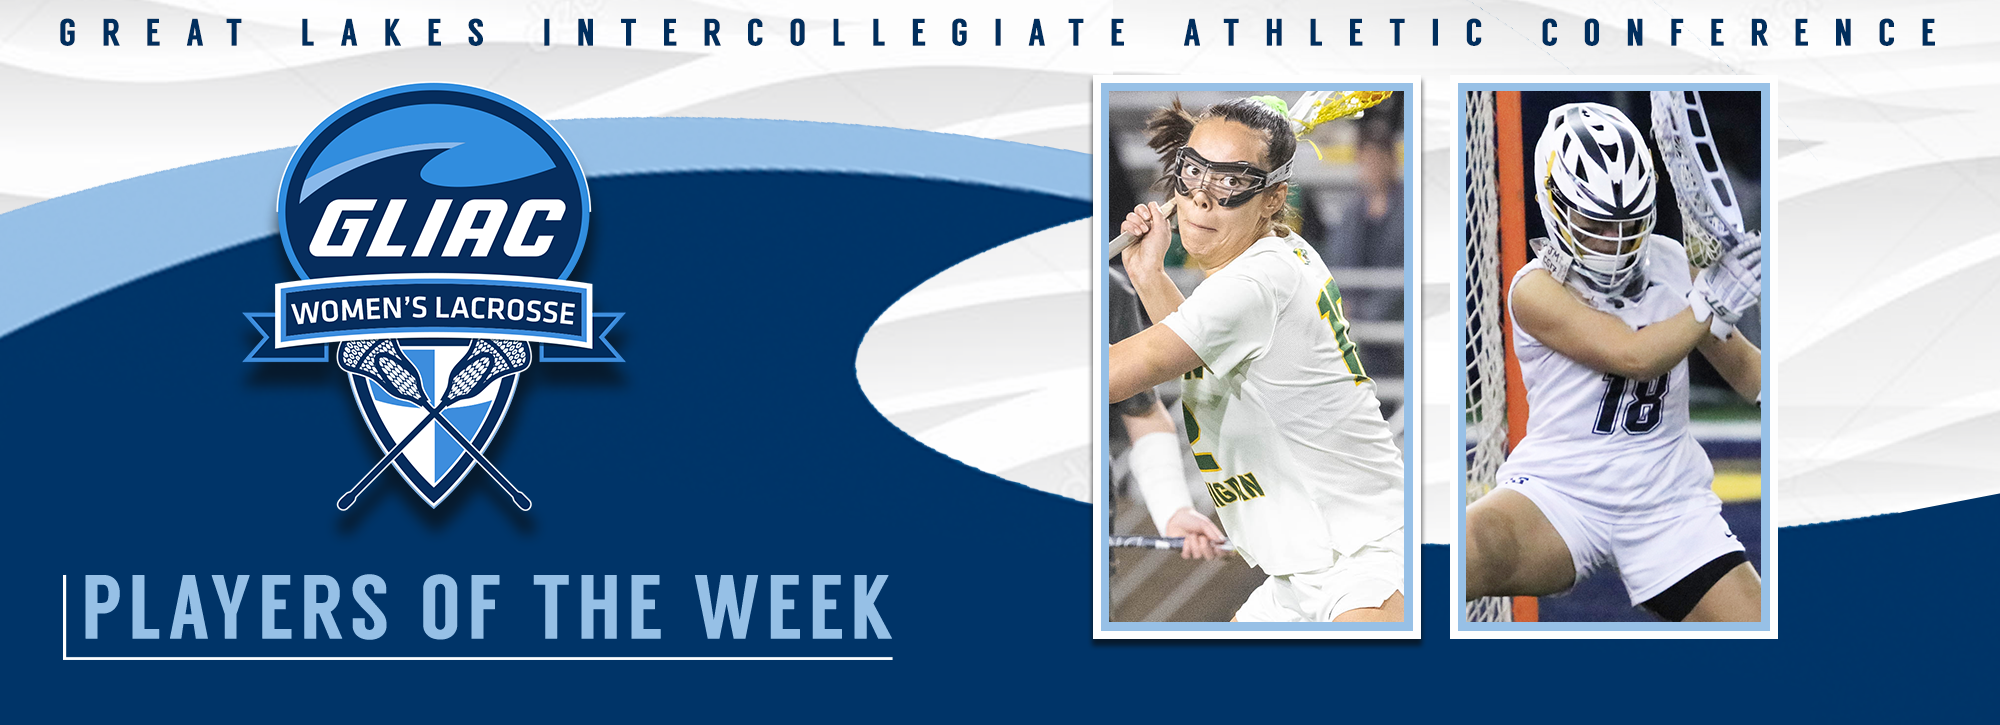 NMU's Bittell and CSP's Lucio honored as GLIAC Women's Lacrosse Players of the Week